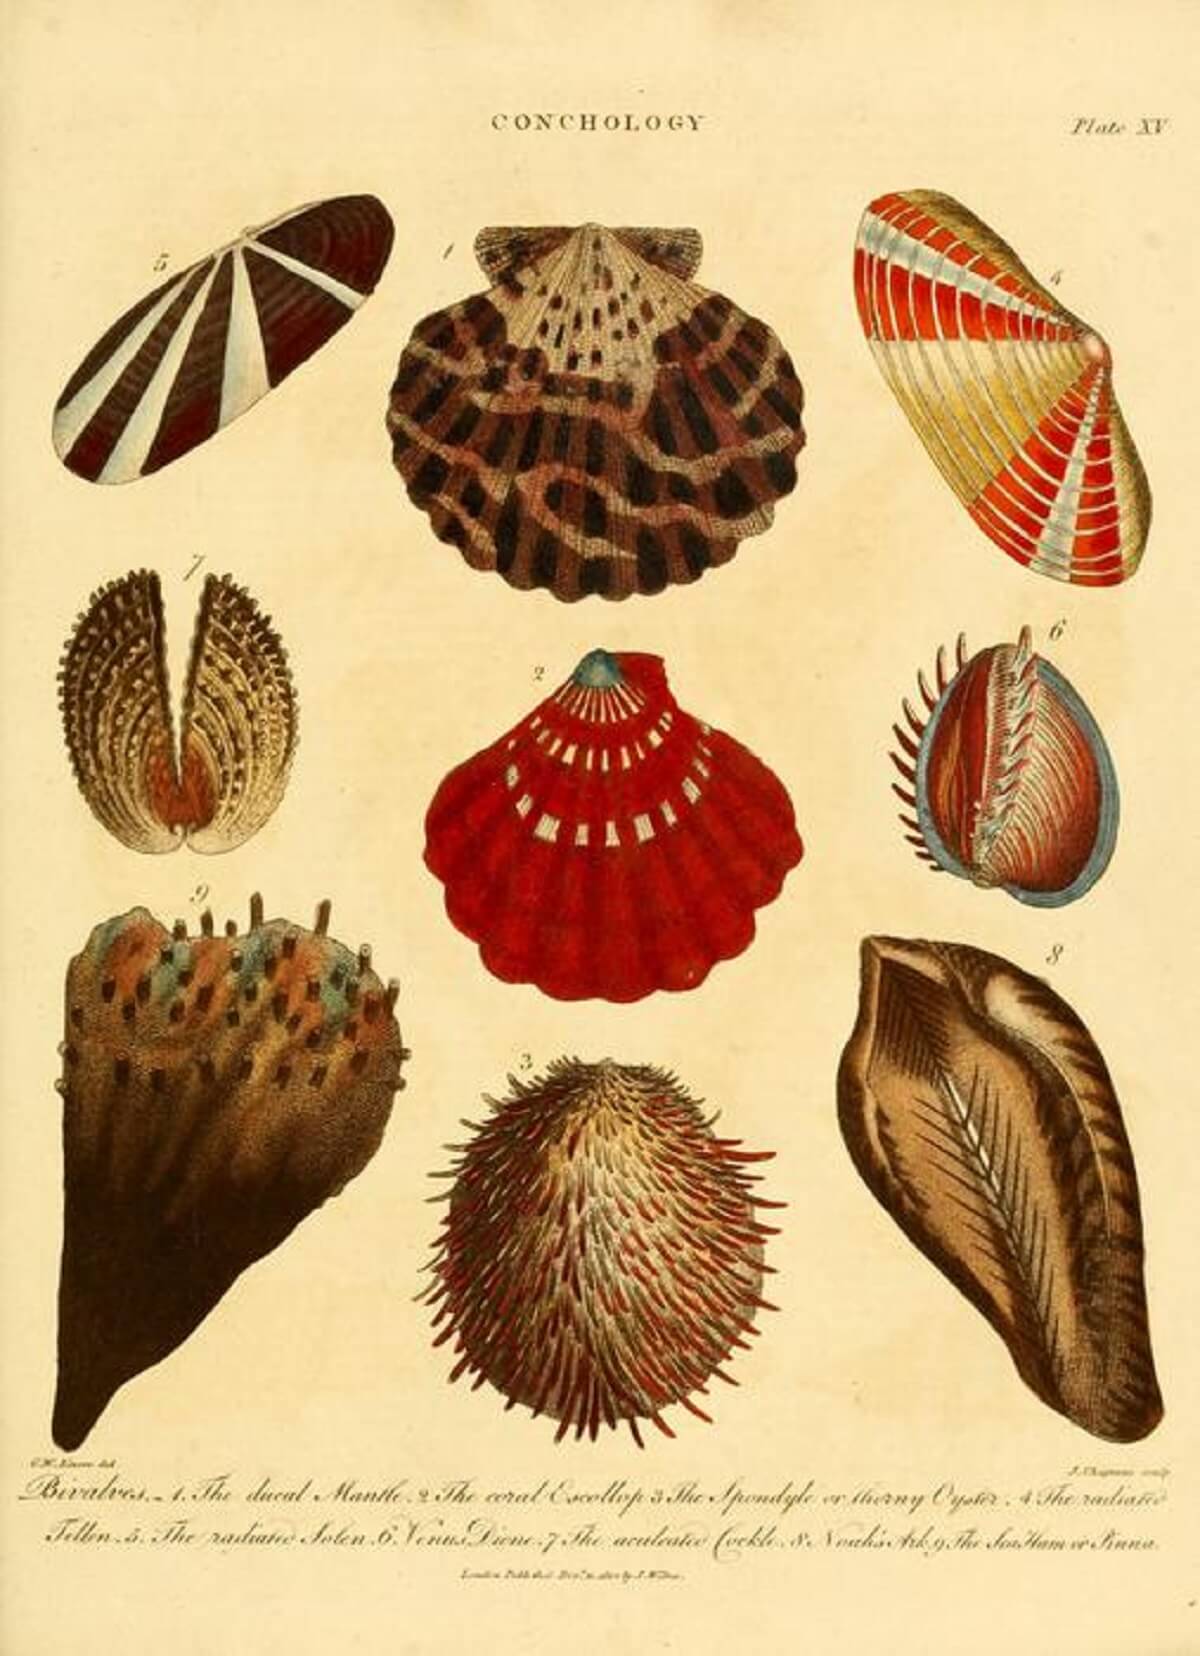 Illustration of nine different kinds of shellfish including clams, mussels, and oysters